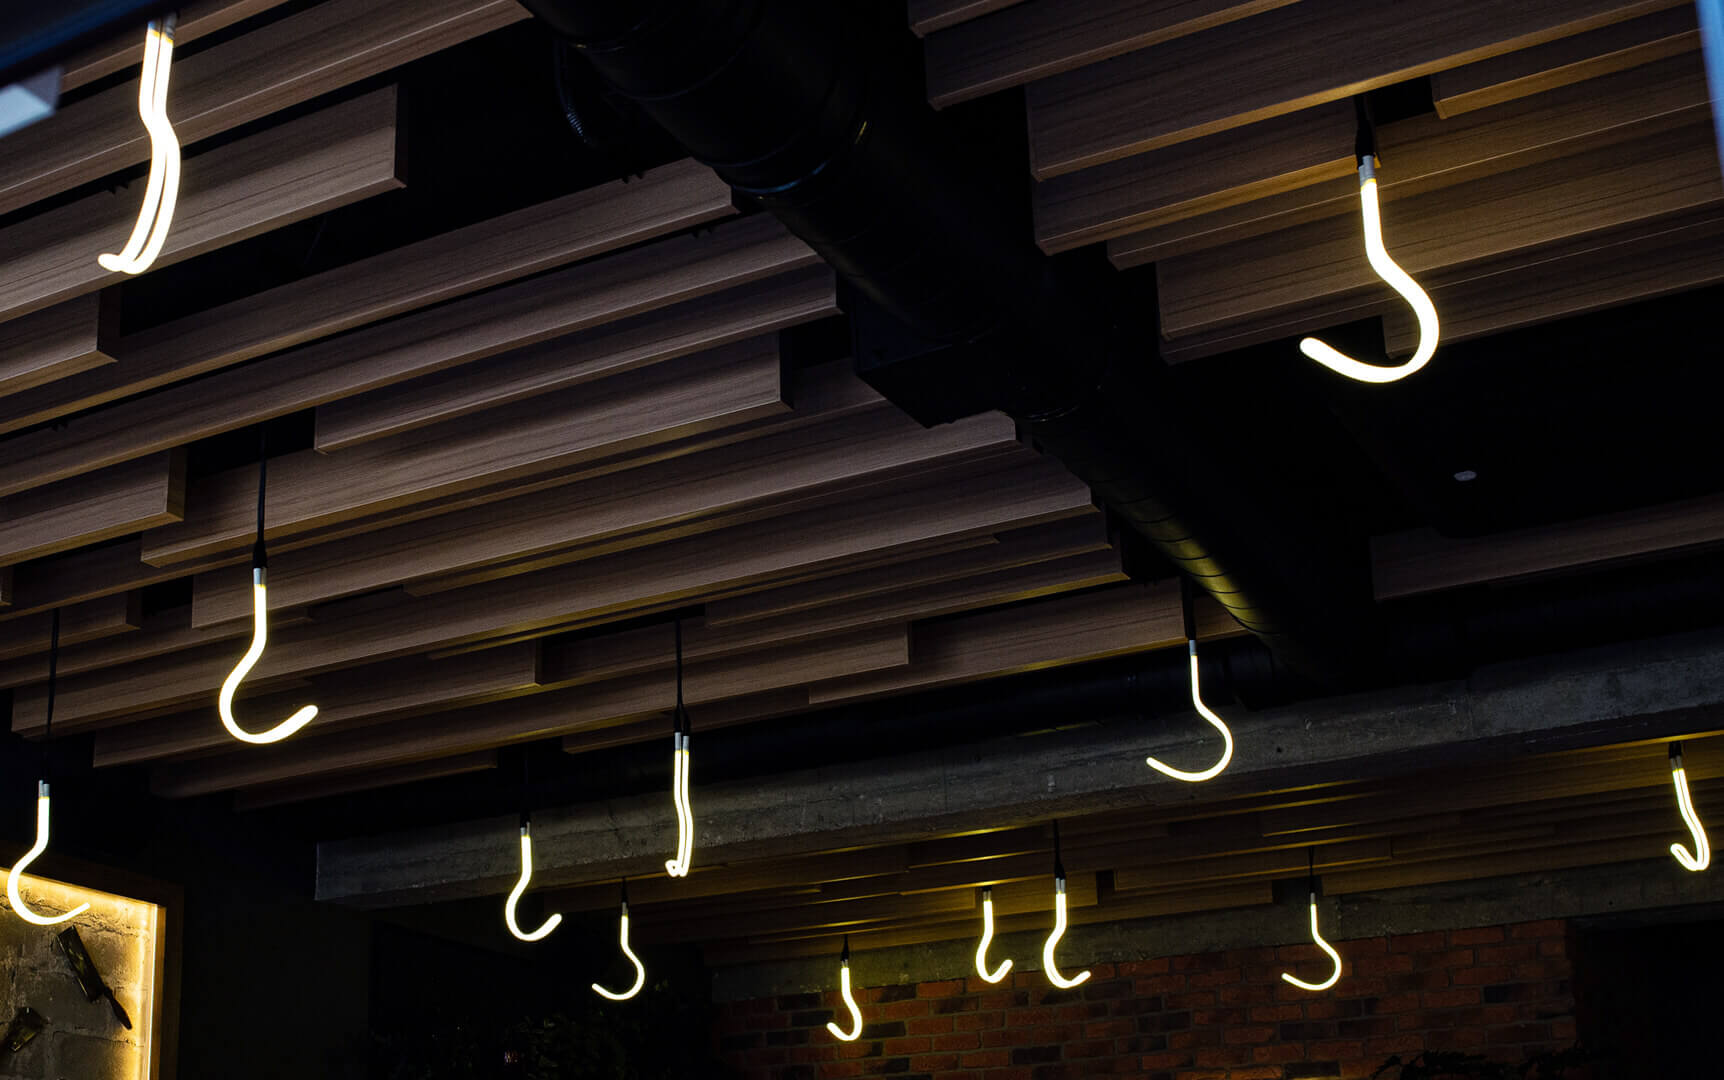 Neon hooks on the ceiling in the steakhouse.